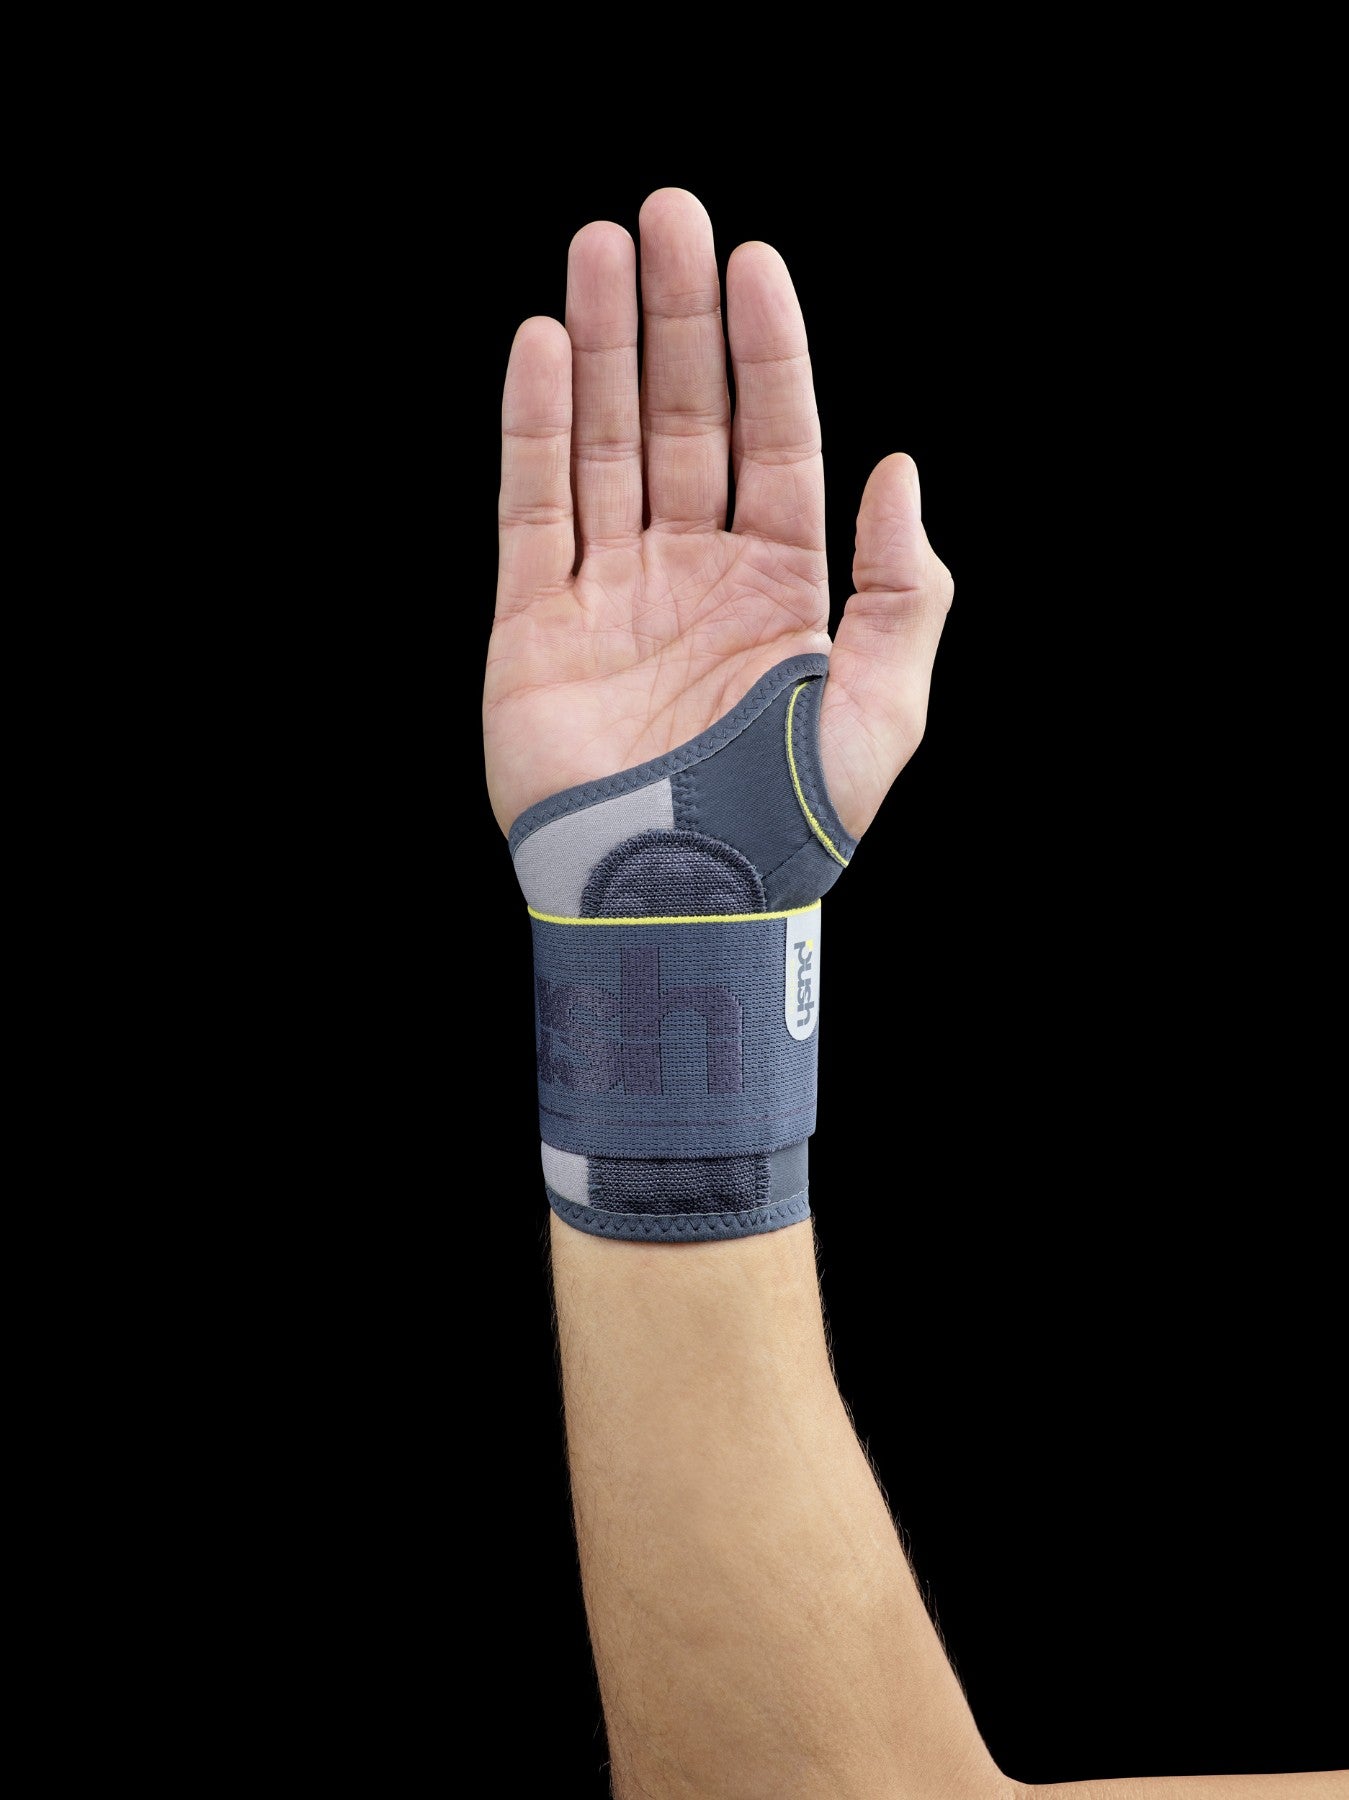 Push Sports Wrist Brace  The best wrist support for any sport